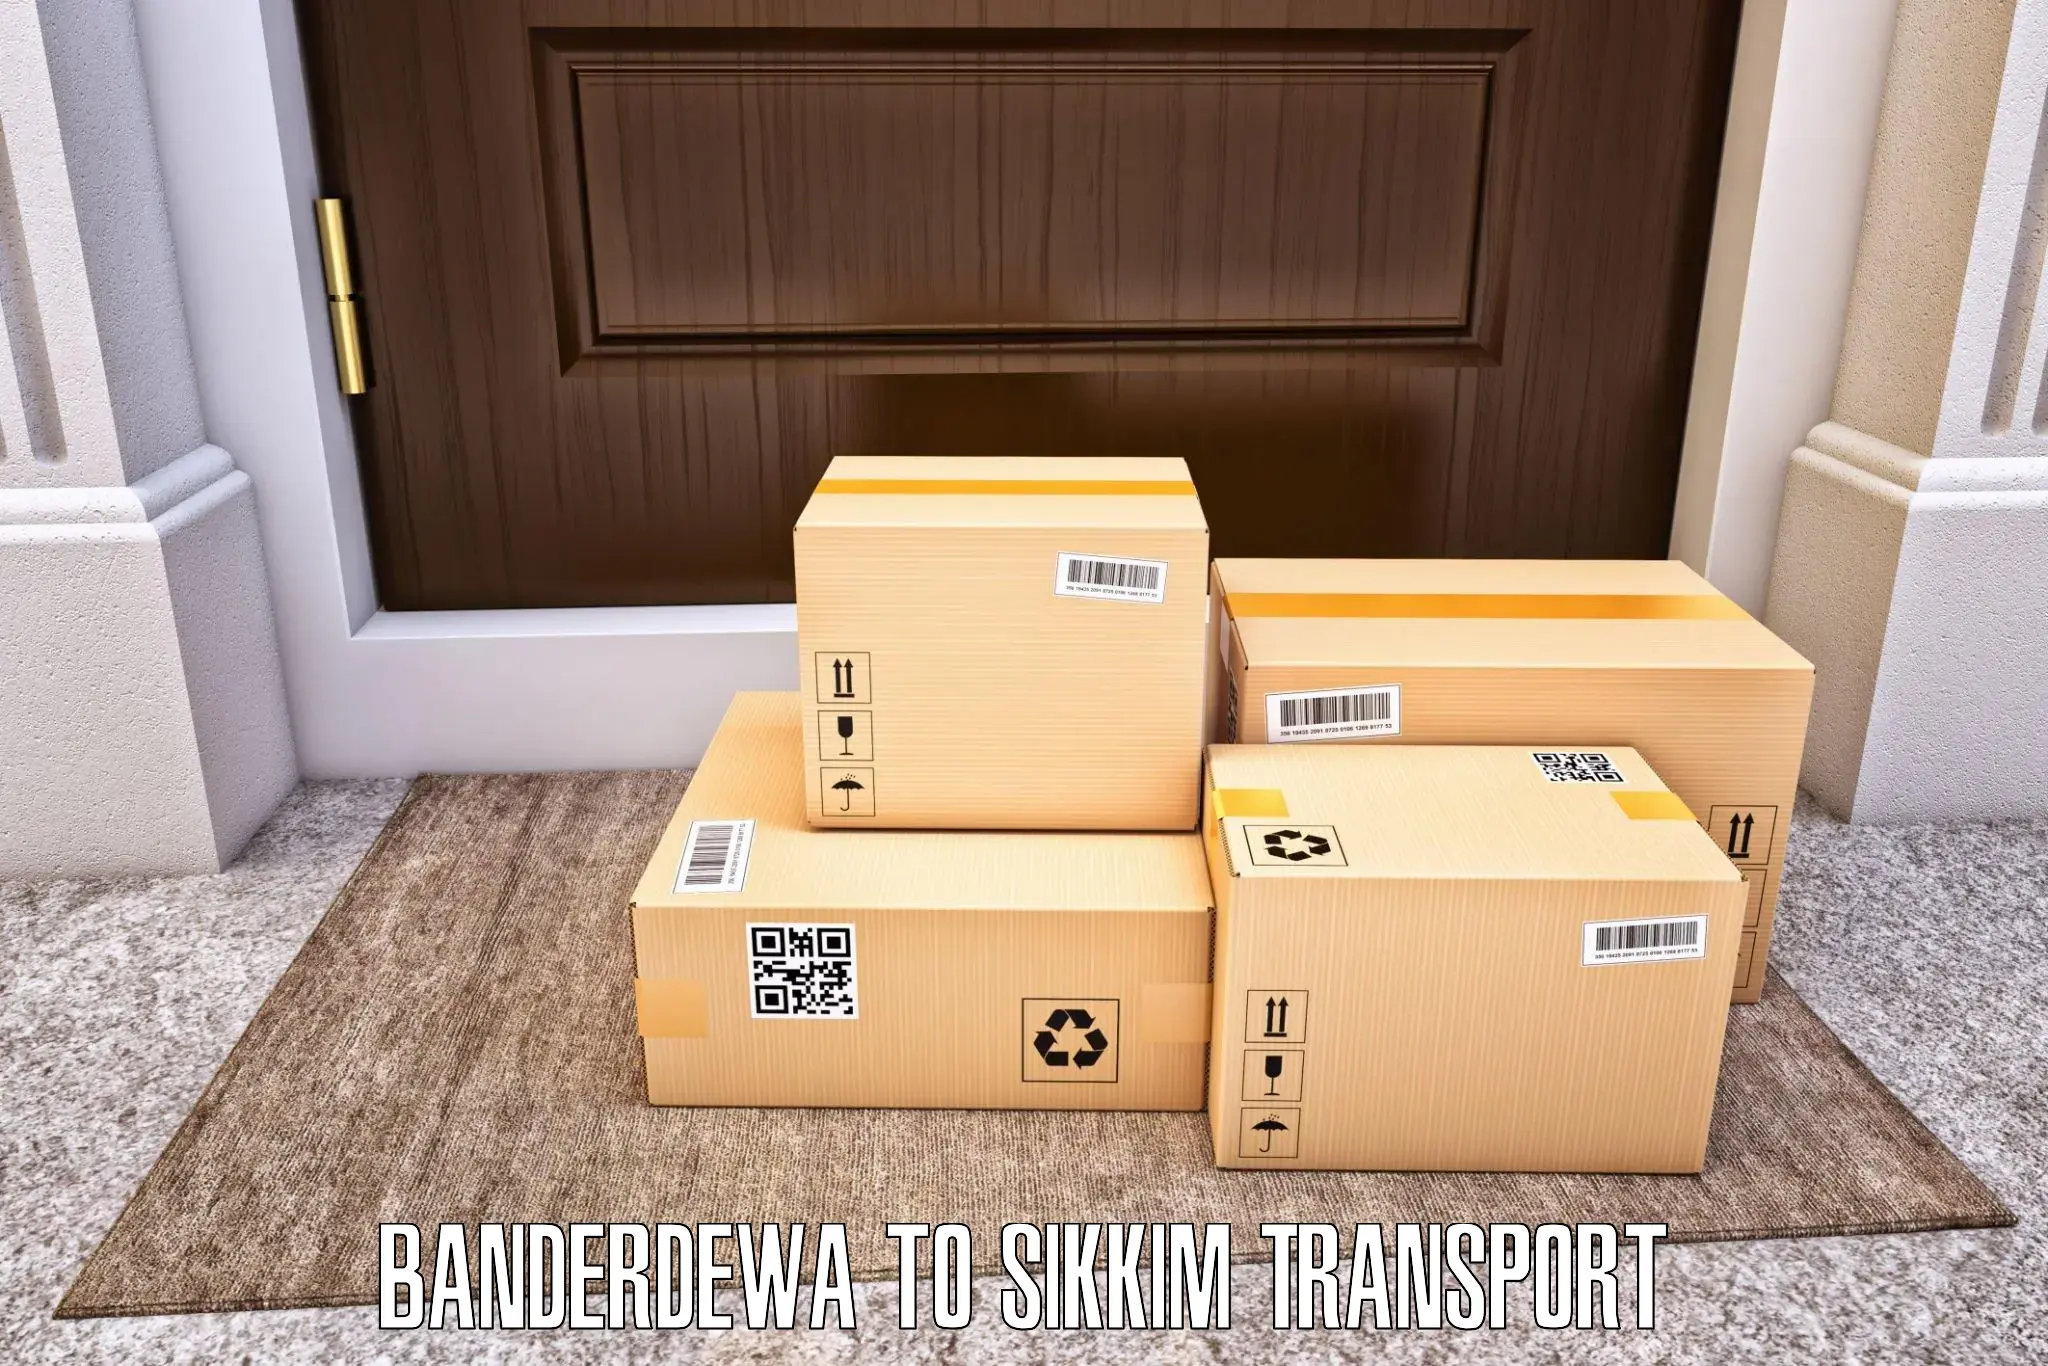 Domestic goods transportation services Banderdewa to South Sikkim